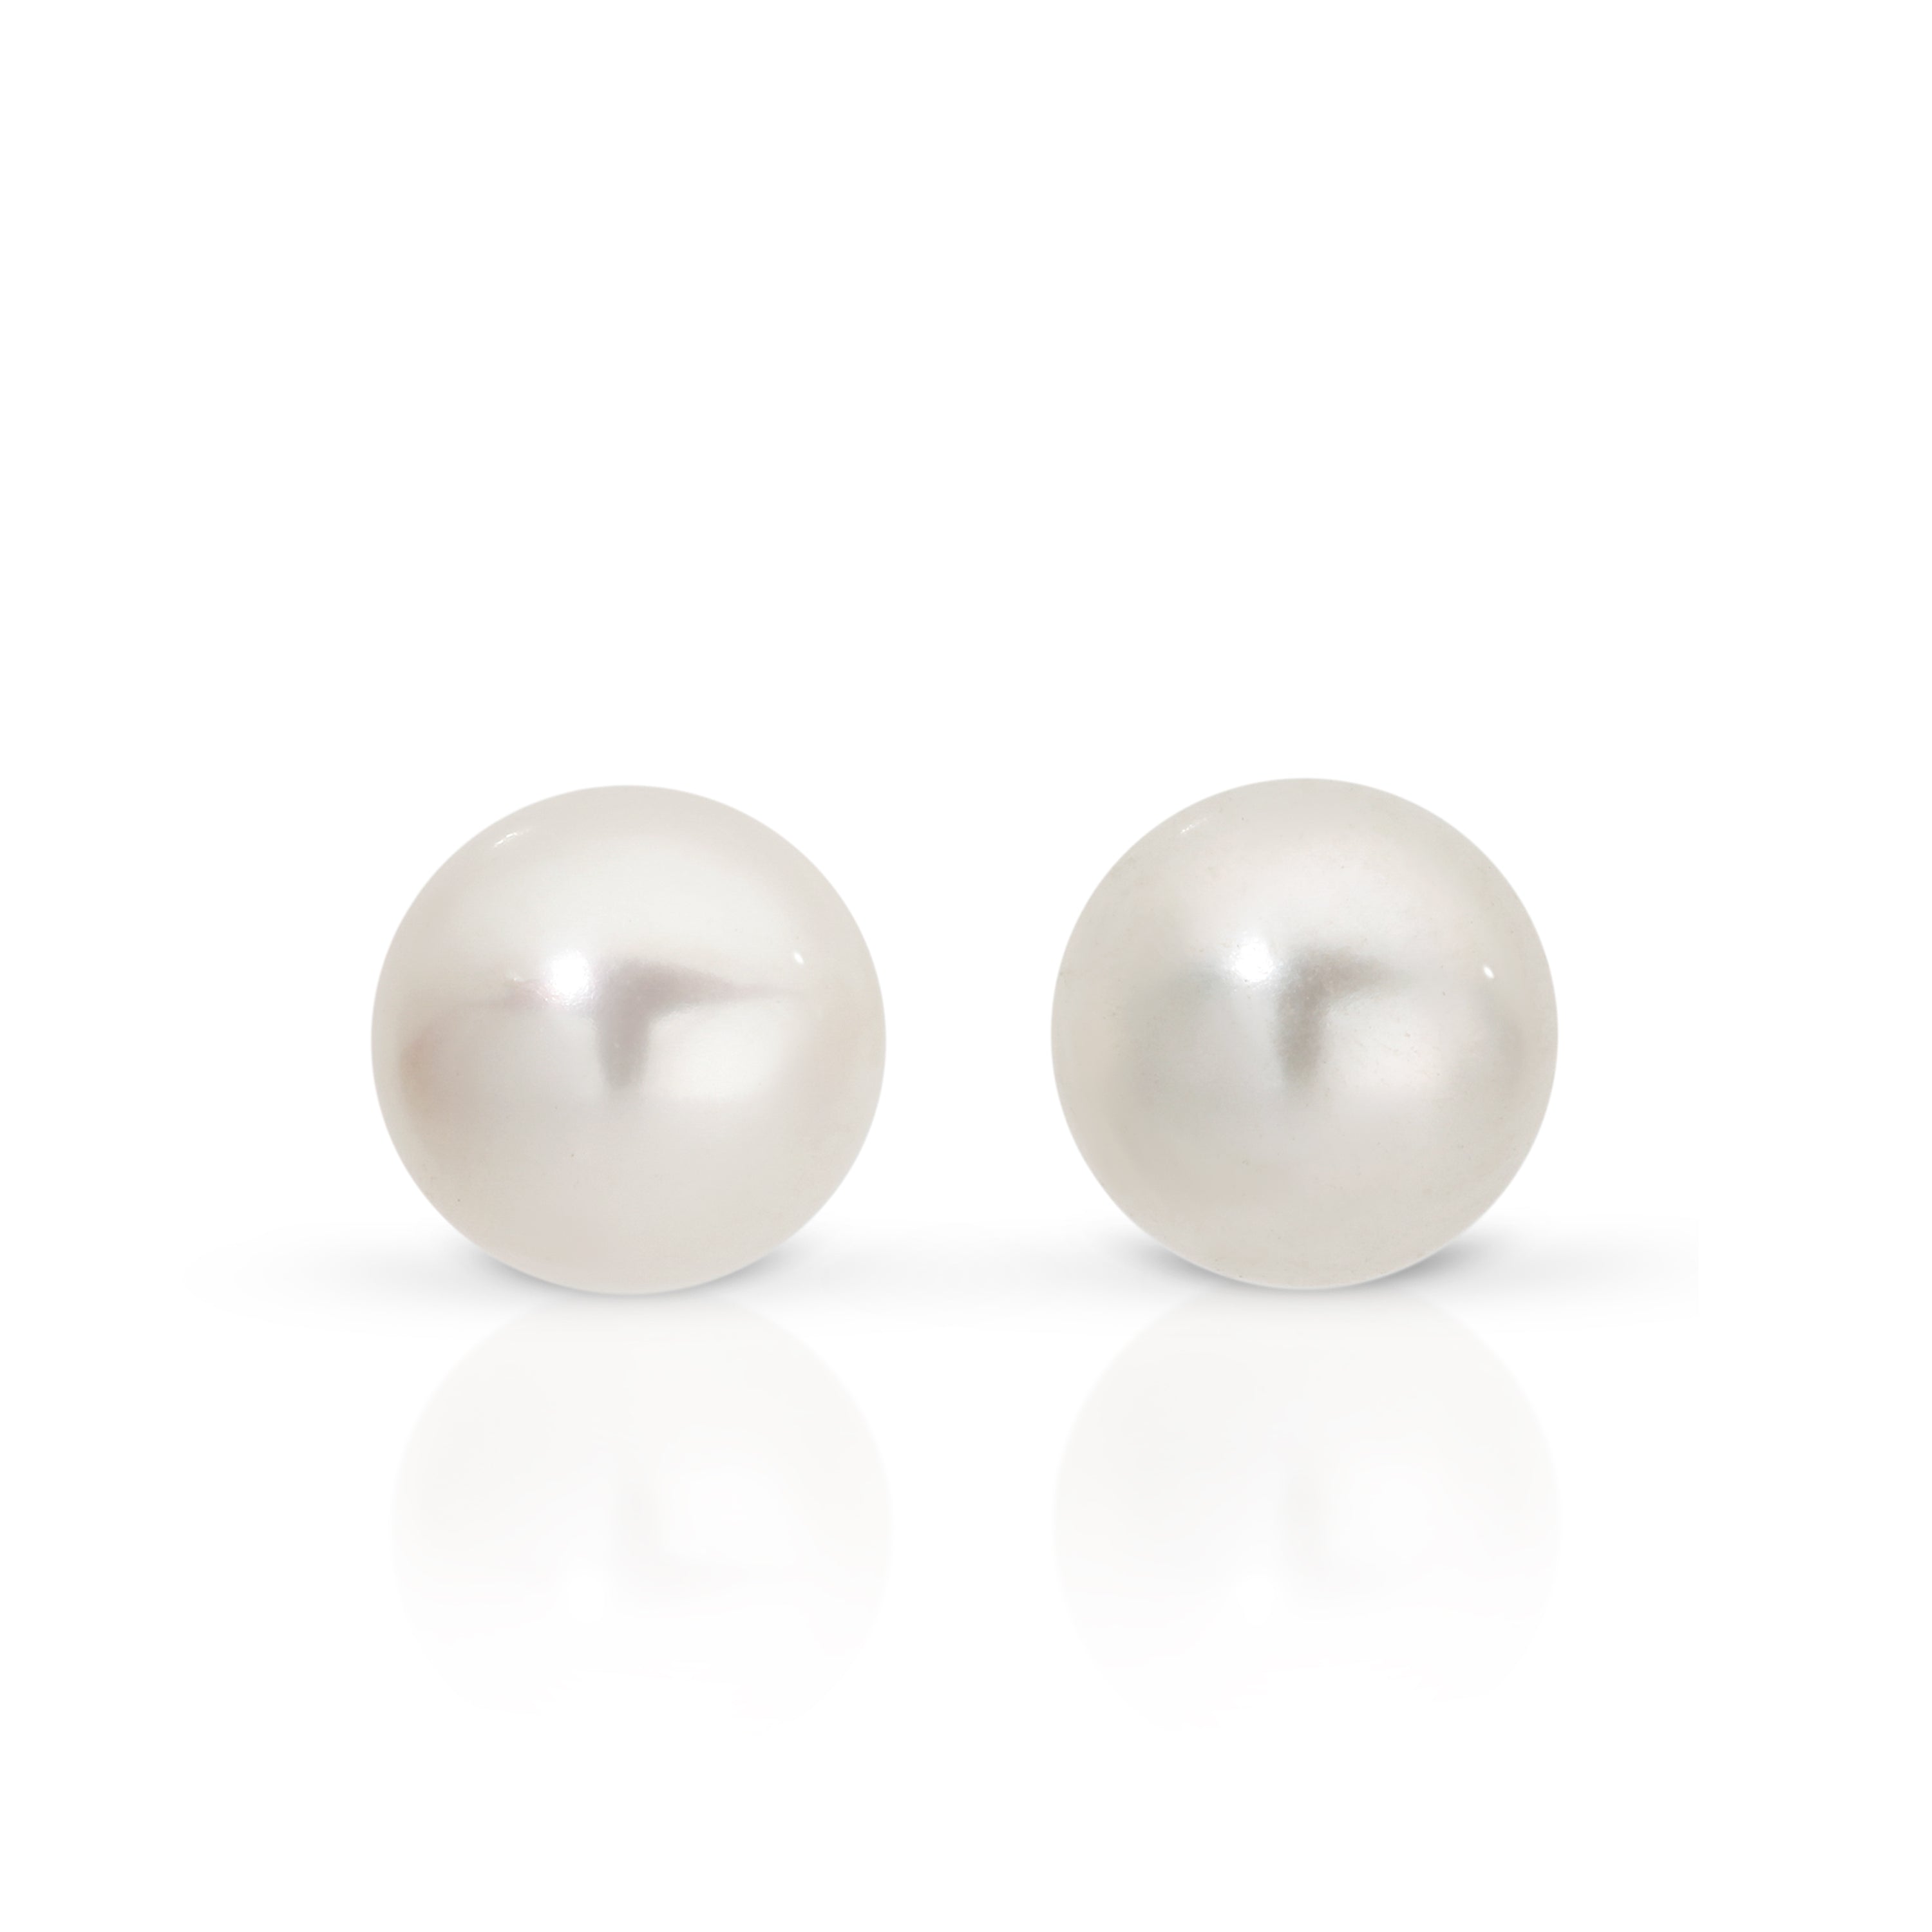 Silver 5mm freshwater pearl studs